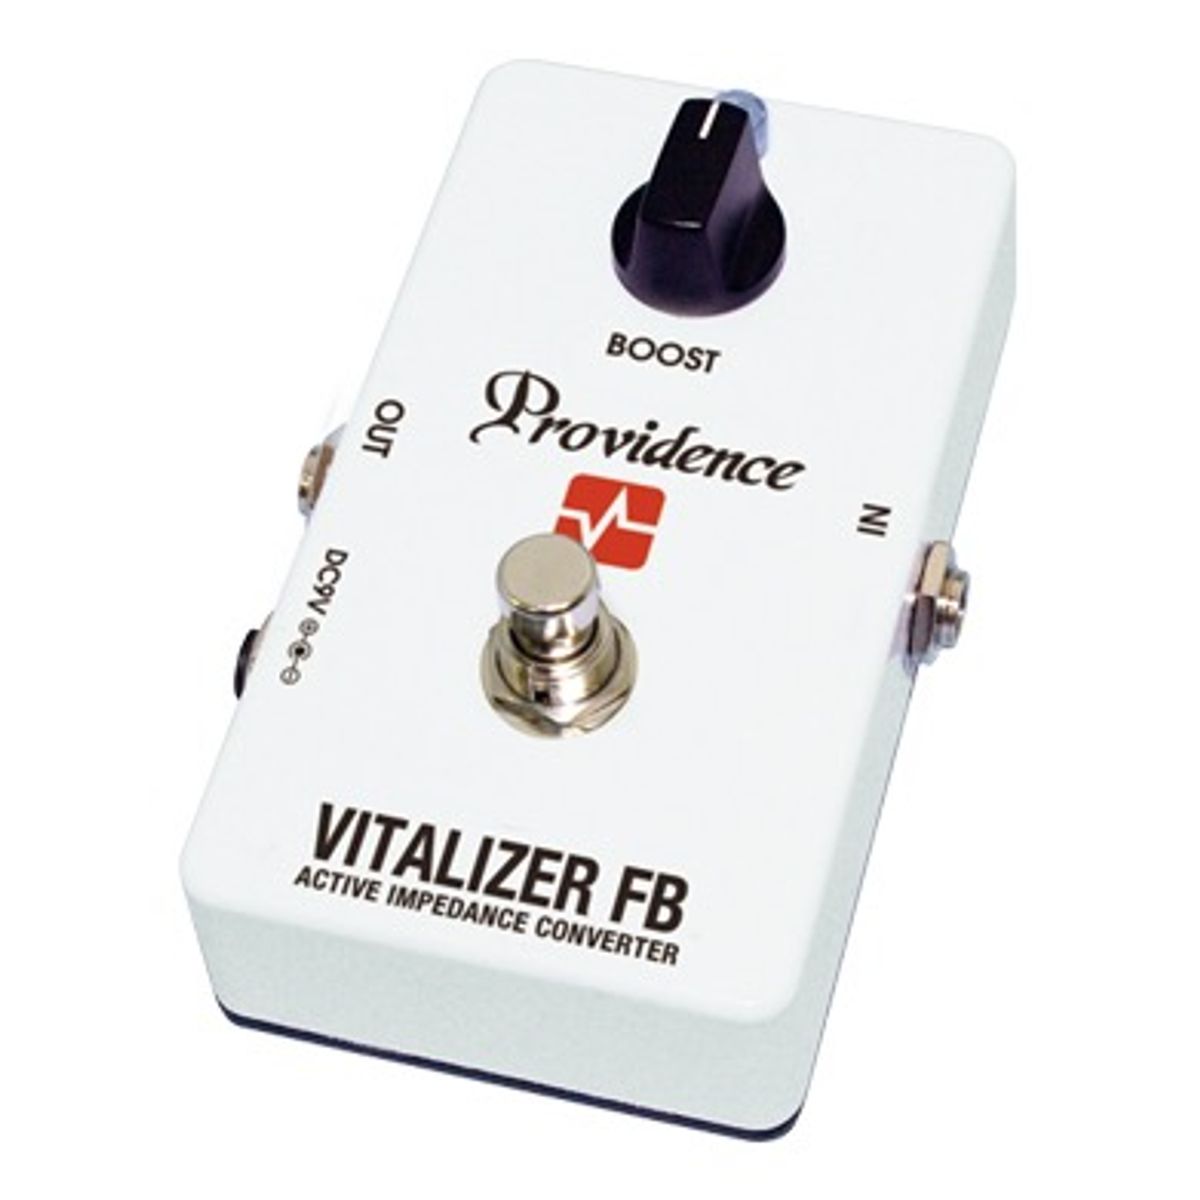 Providence Introduces the Vitalizer FB